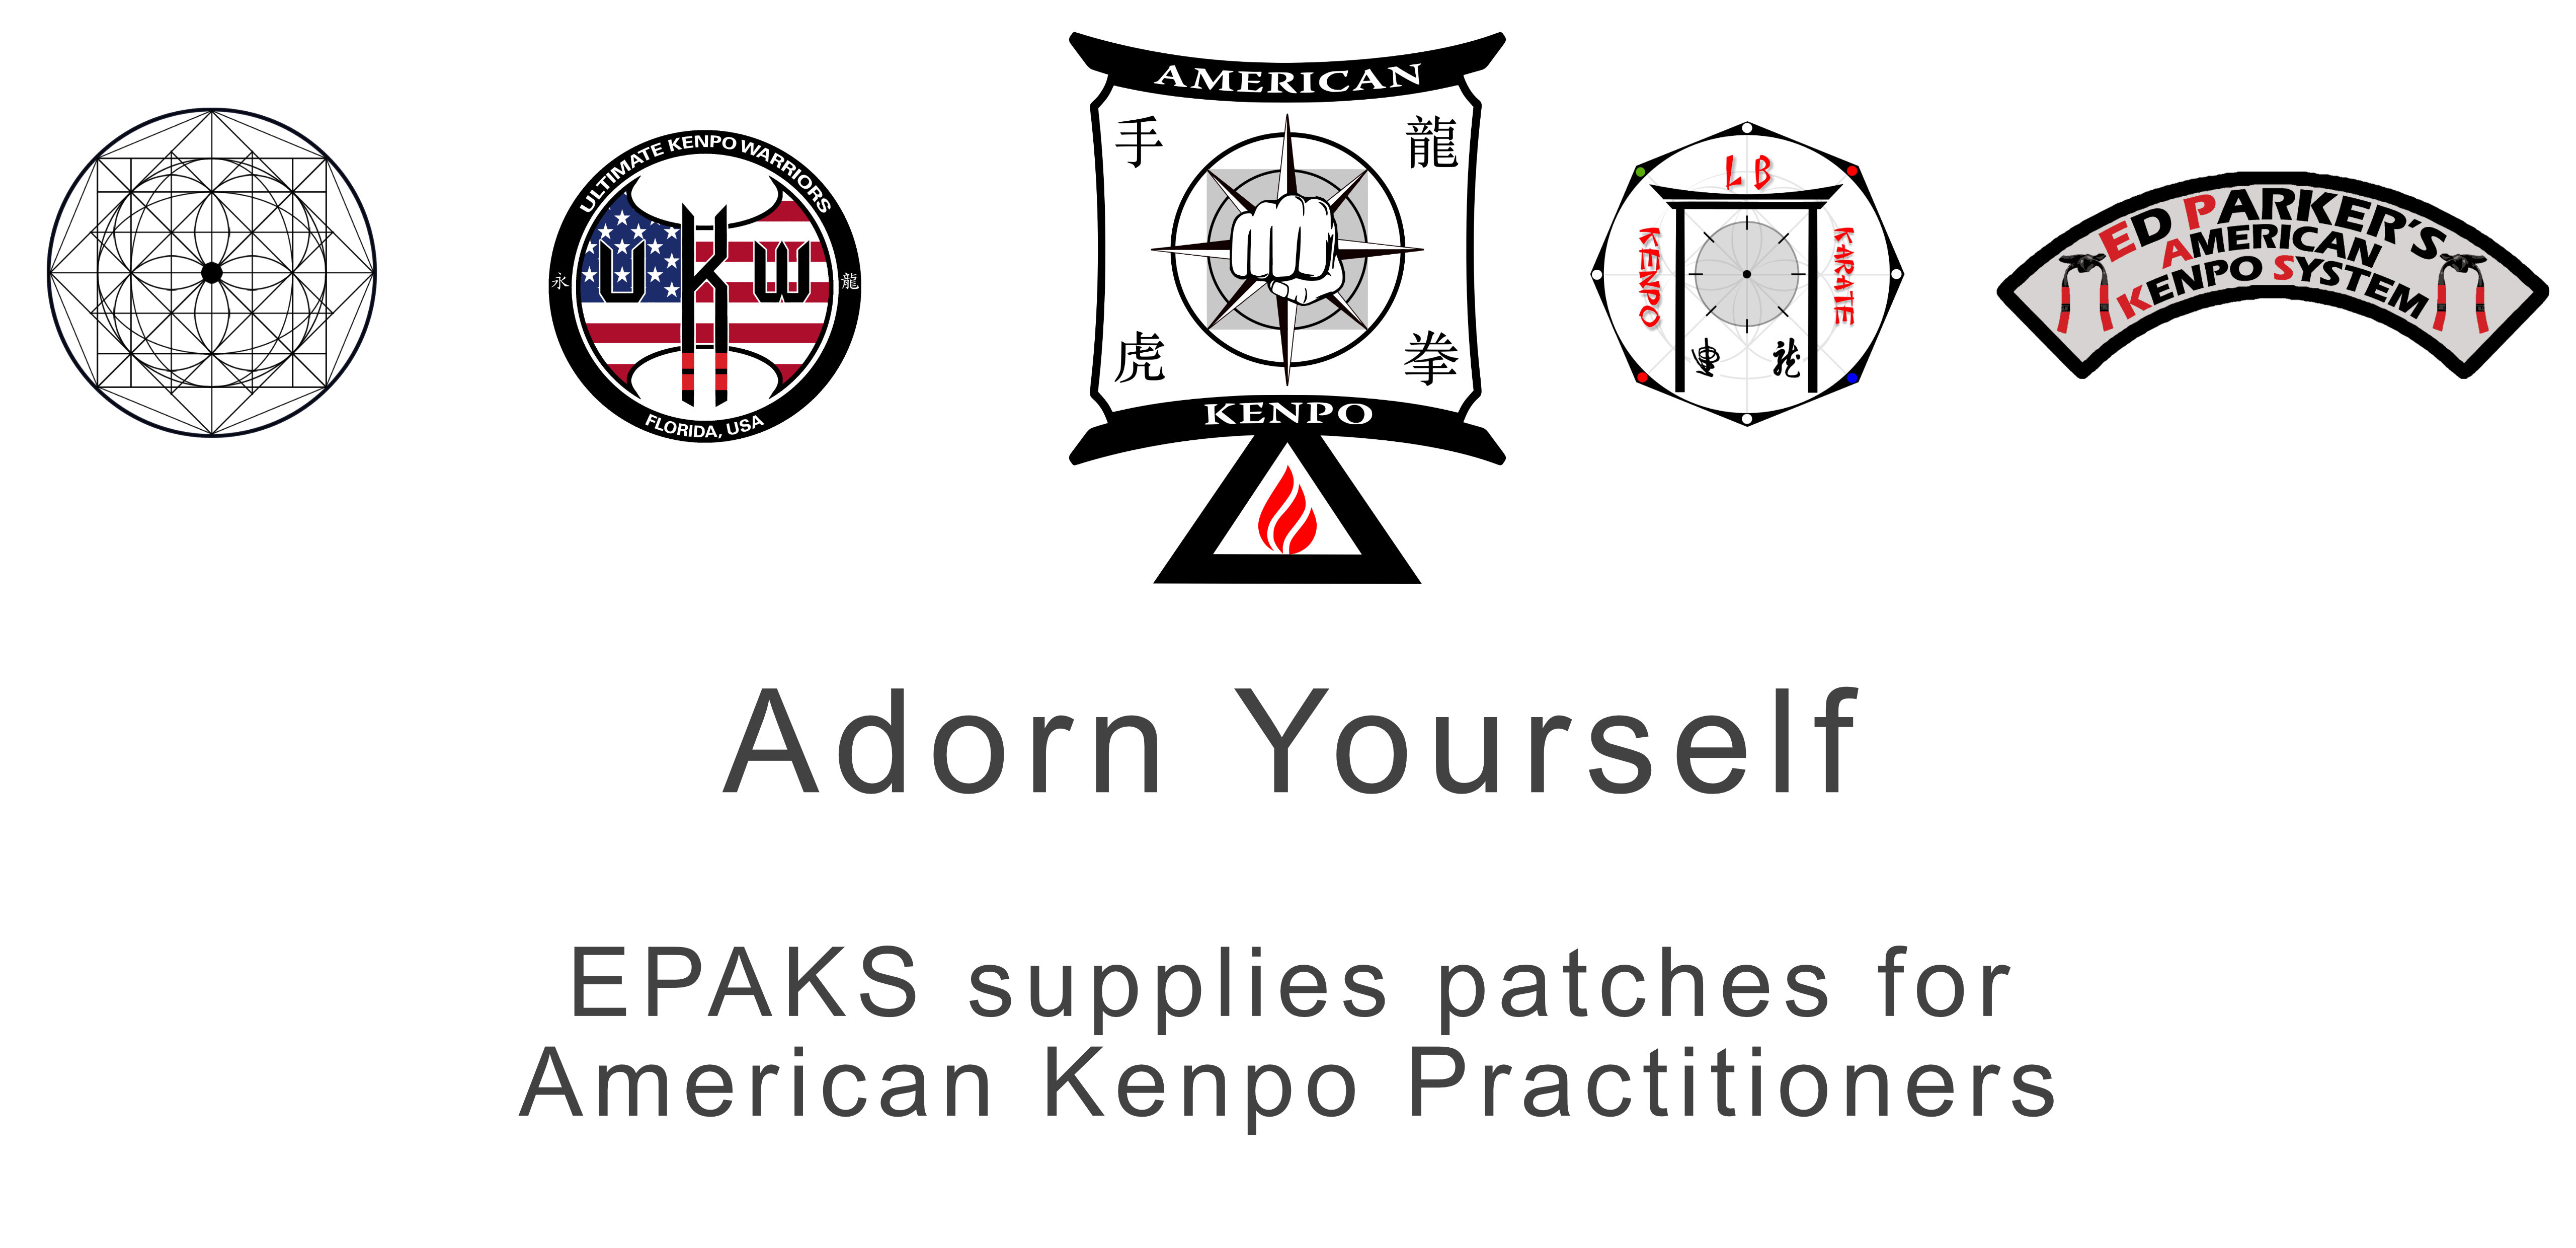 LARGE SIZE ED PARKER AMERICAN KENPO KARATE CREST PATCH 6" X 5" NEW 